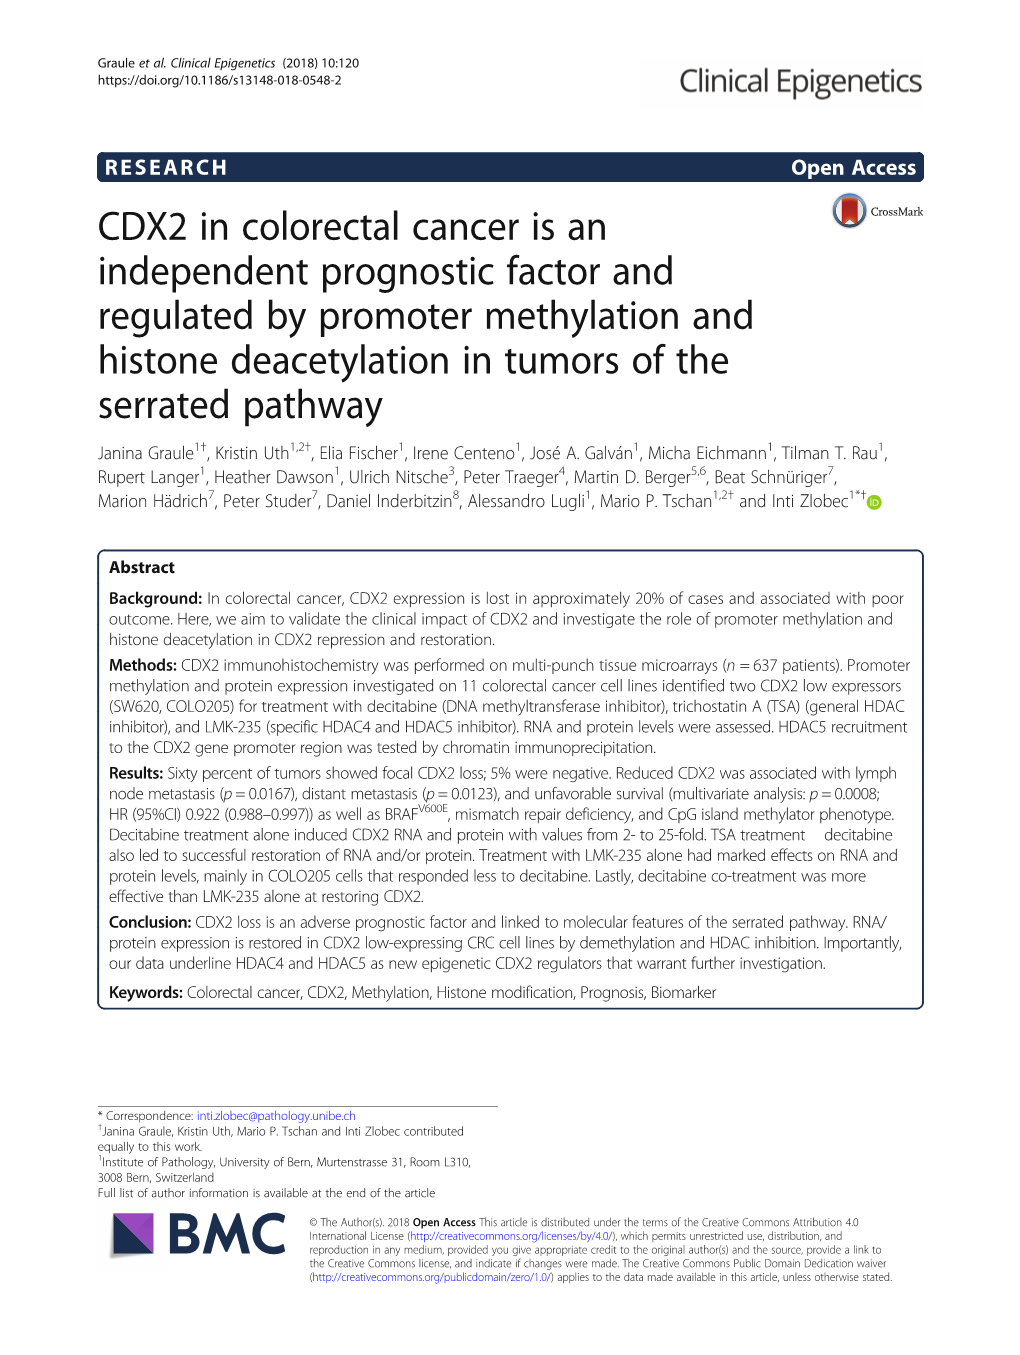 CDX2 in Colorectal Cancer Is an Independent Prognostic Factor And